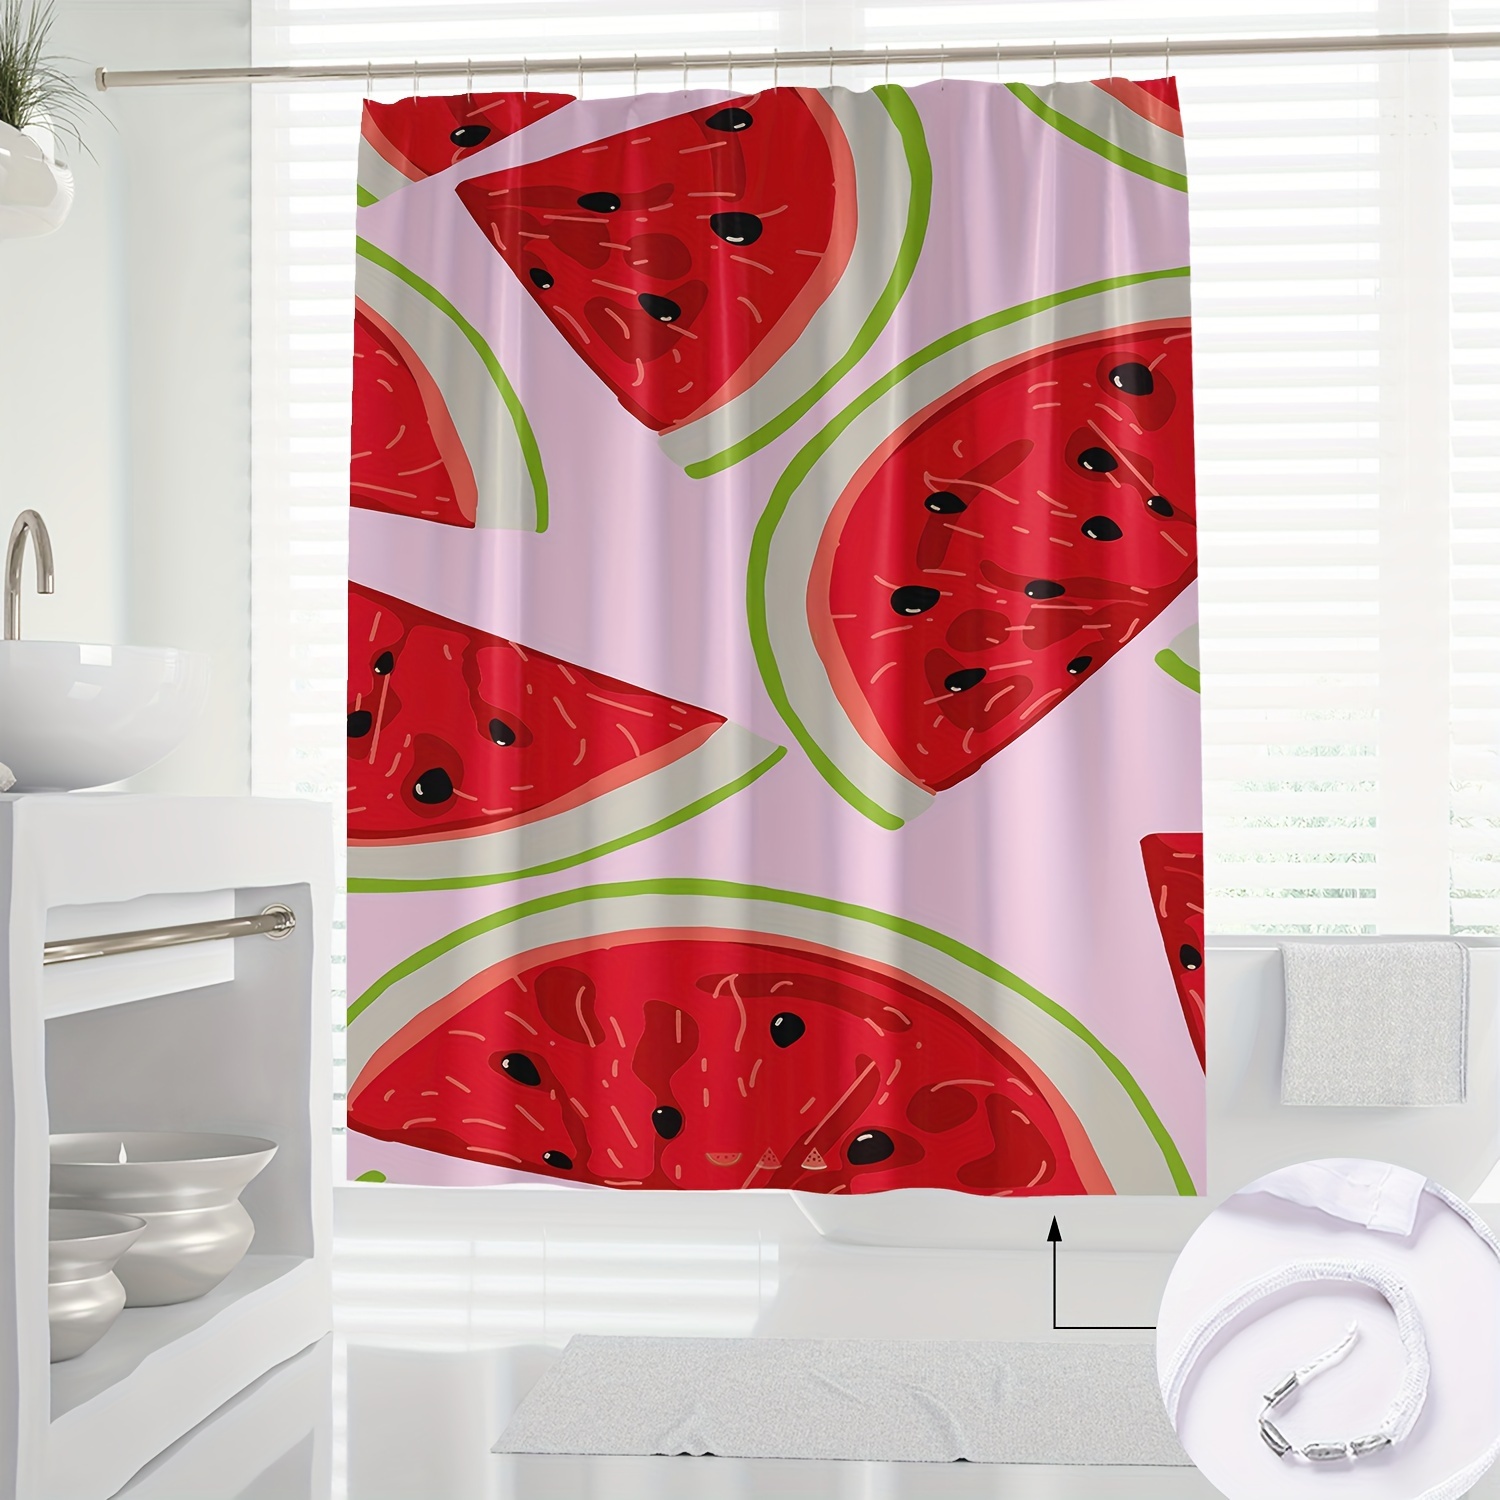 

Watermelon Design Shower Curtain, 1pc - Novelty Summer Fruit Print Bathroom Decor, Machine Washable, Knit Weave, Water-resistant Polyester, Includes Hooks, For All Seasons